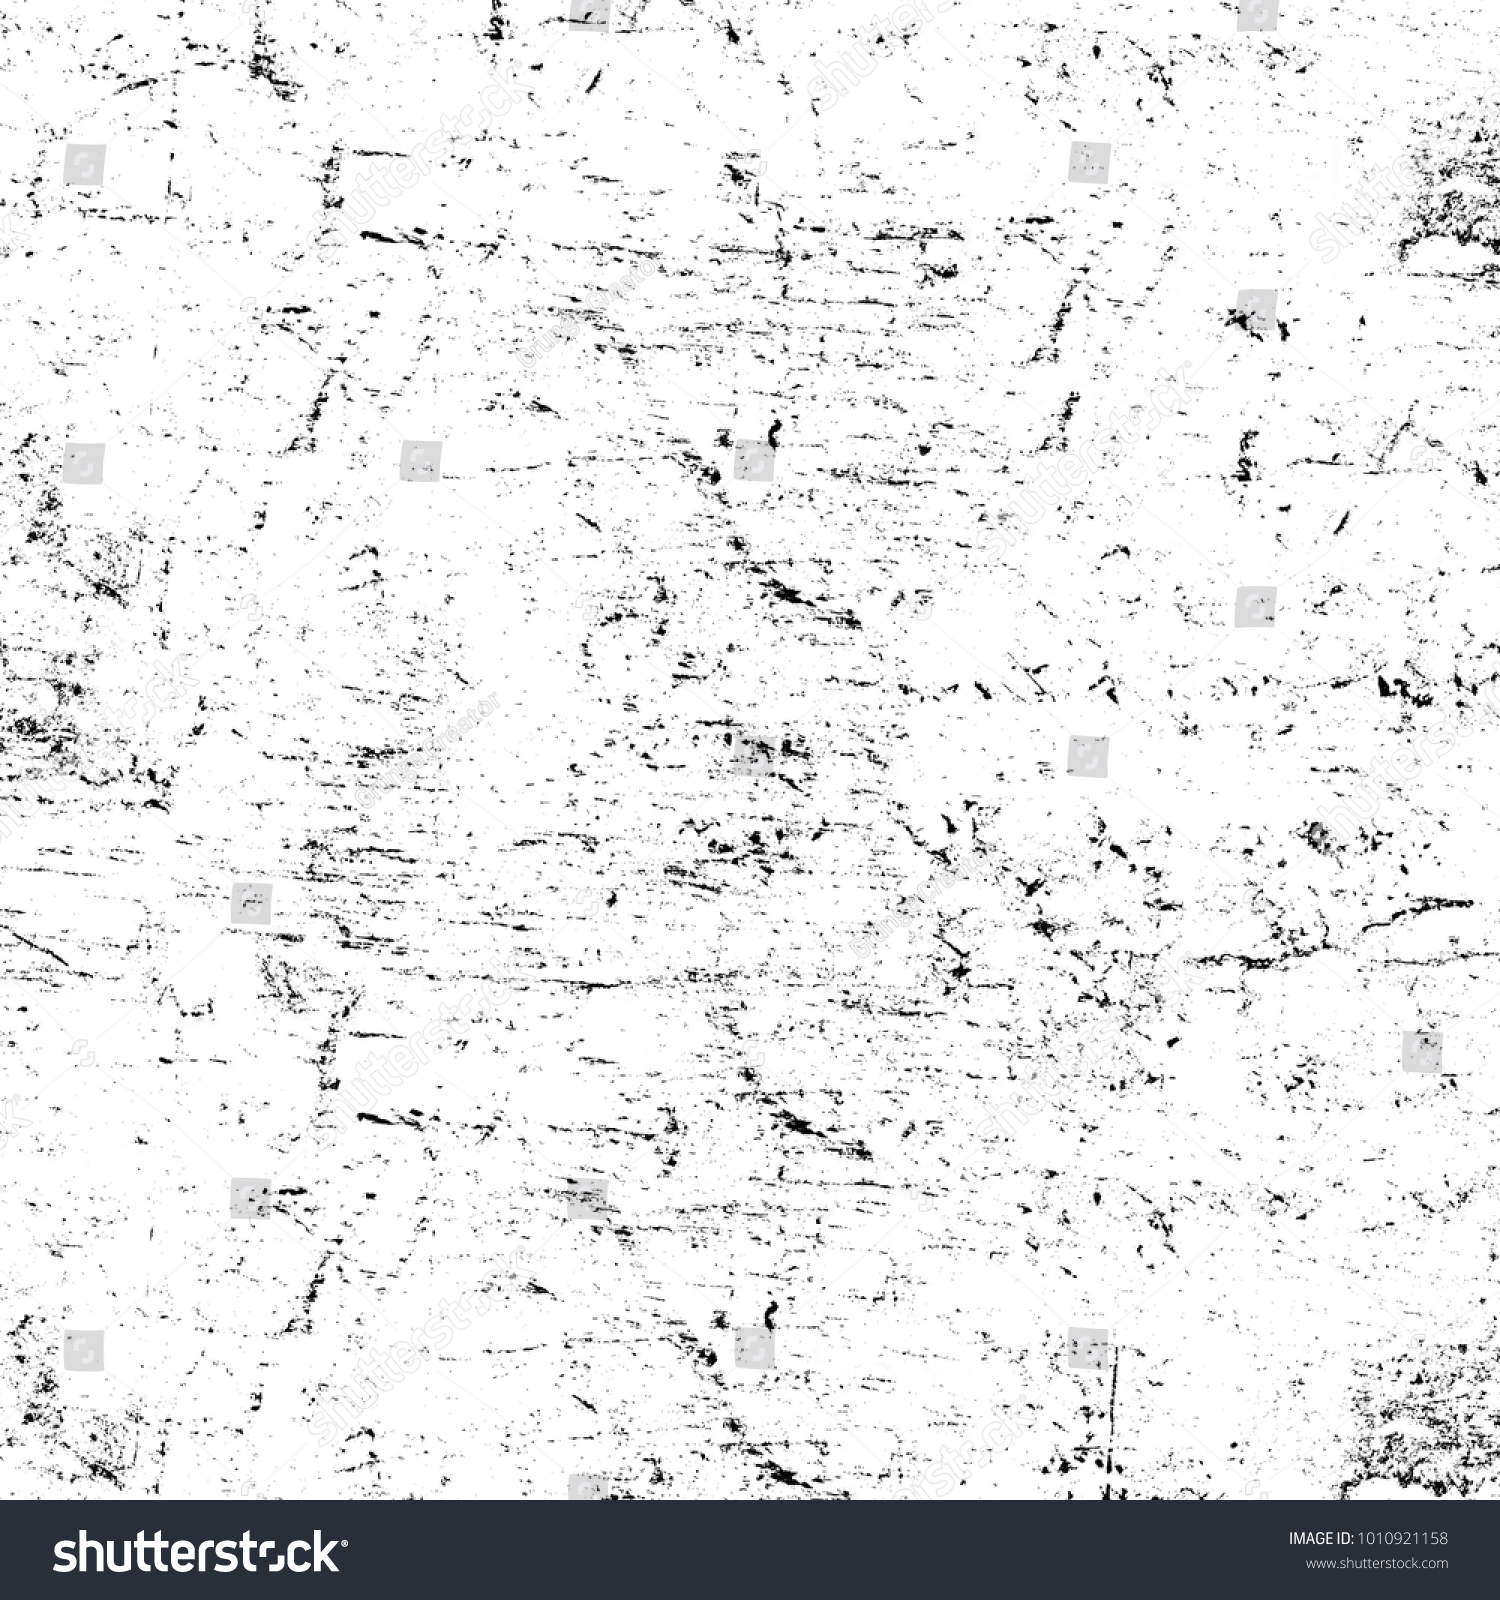 Grunge black and white pattern. Monochrome particles abstract texture. Background of cracks, scuffs, chips, stains, ink spots, lines. Dark design background surface. Gray printing element #1010921158